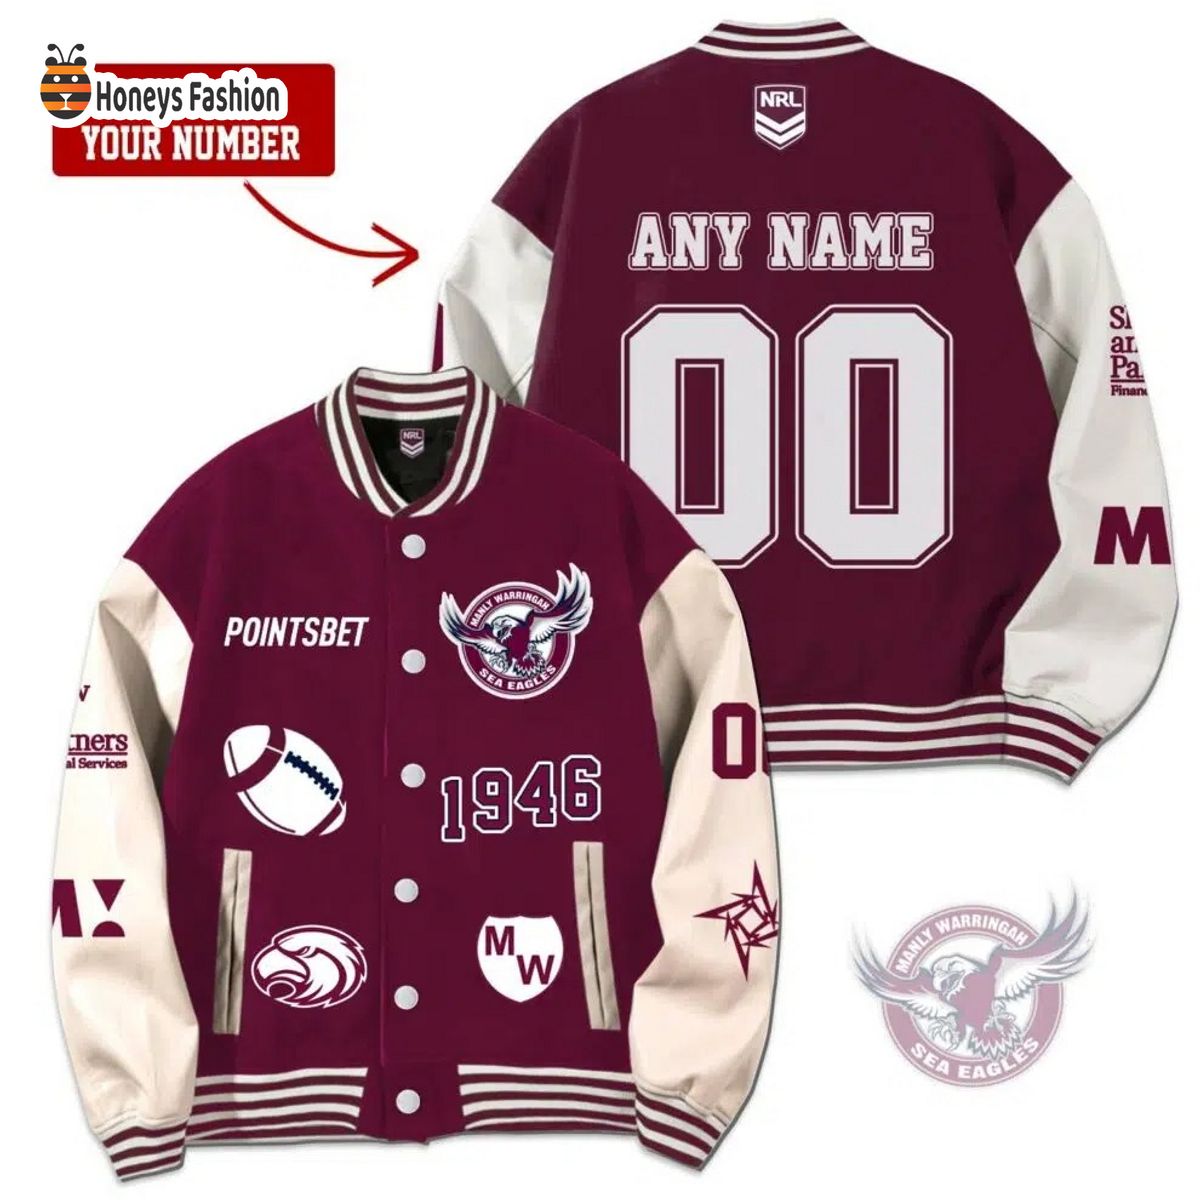 Manly Sea Eagles Rugby Personalized Jacket